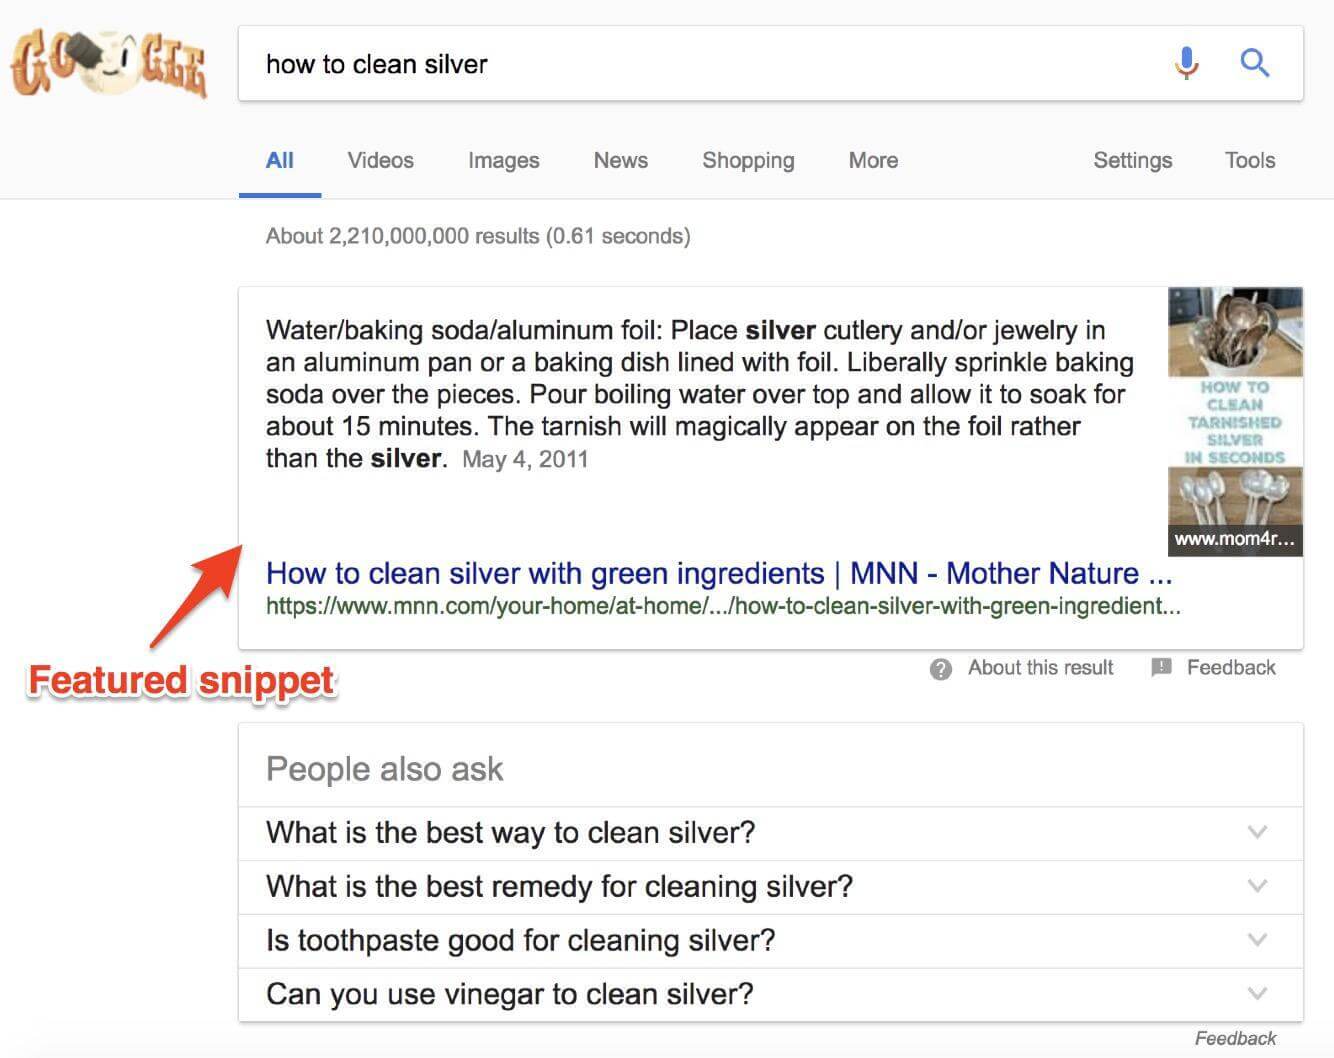 google snippets